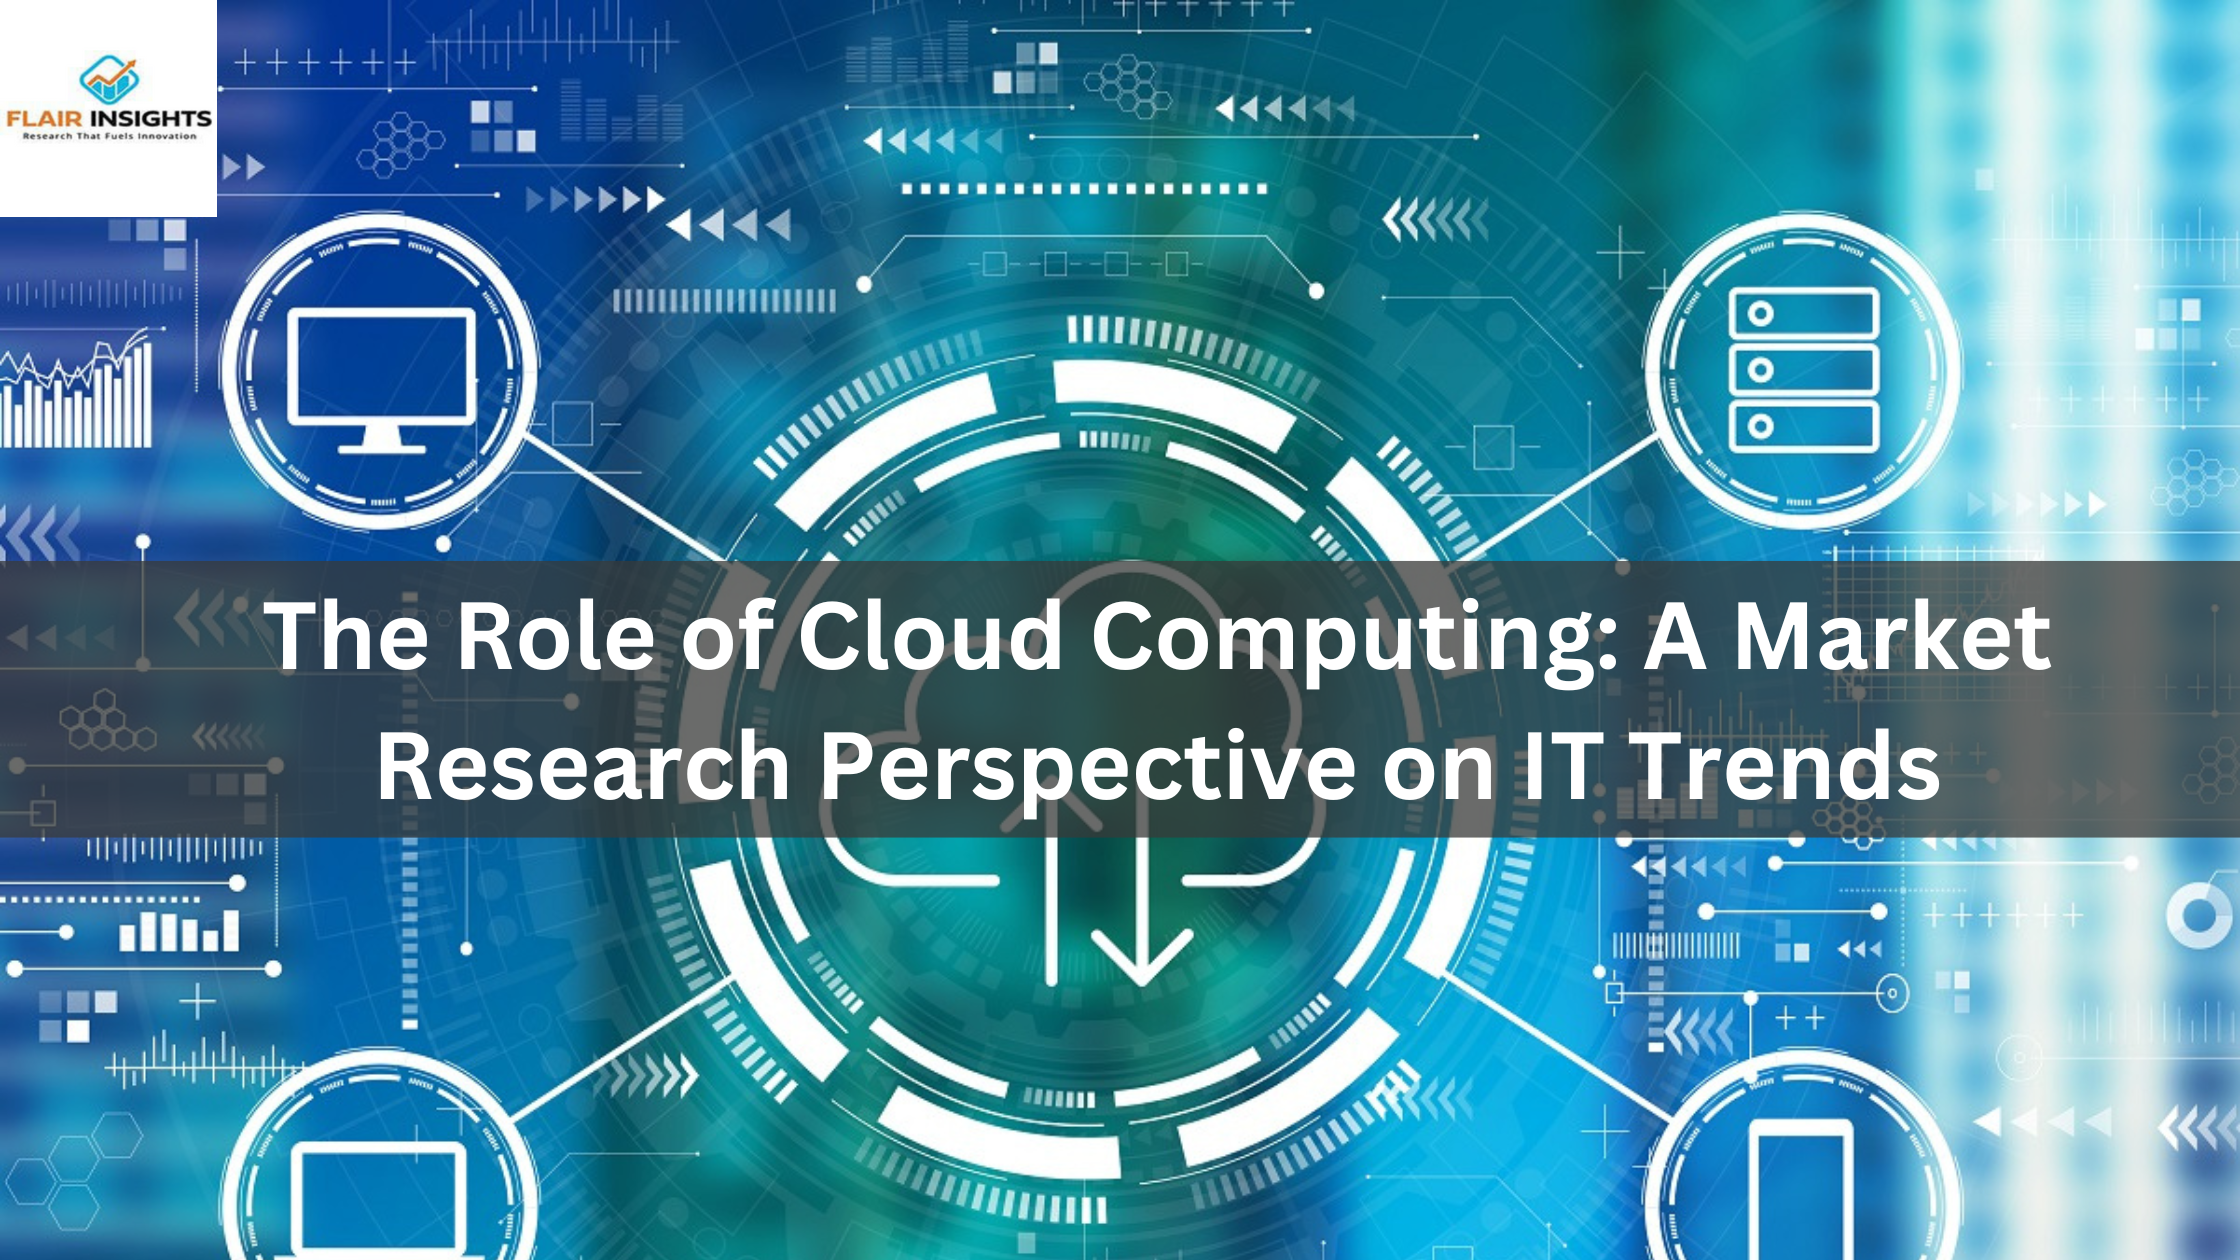 The Role of Cloud Computing: A Market Research Perspective on IT Trends